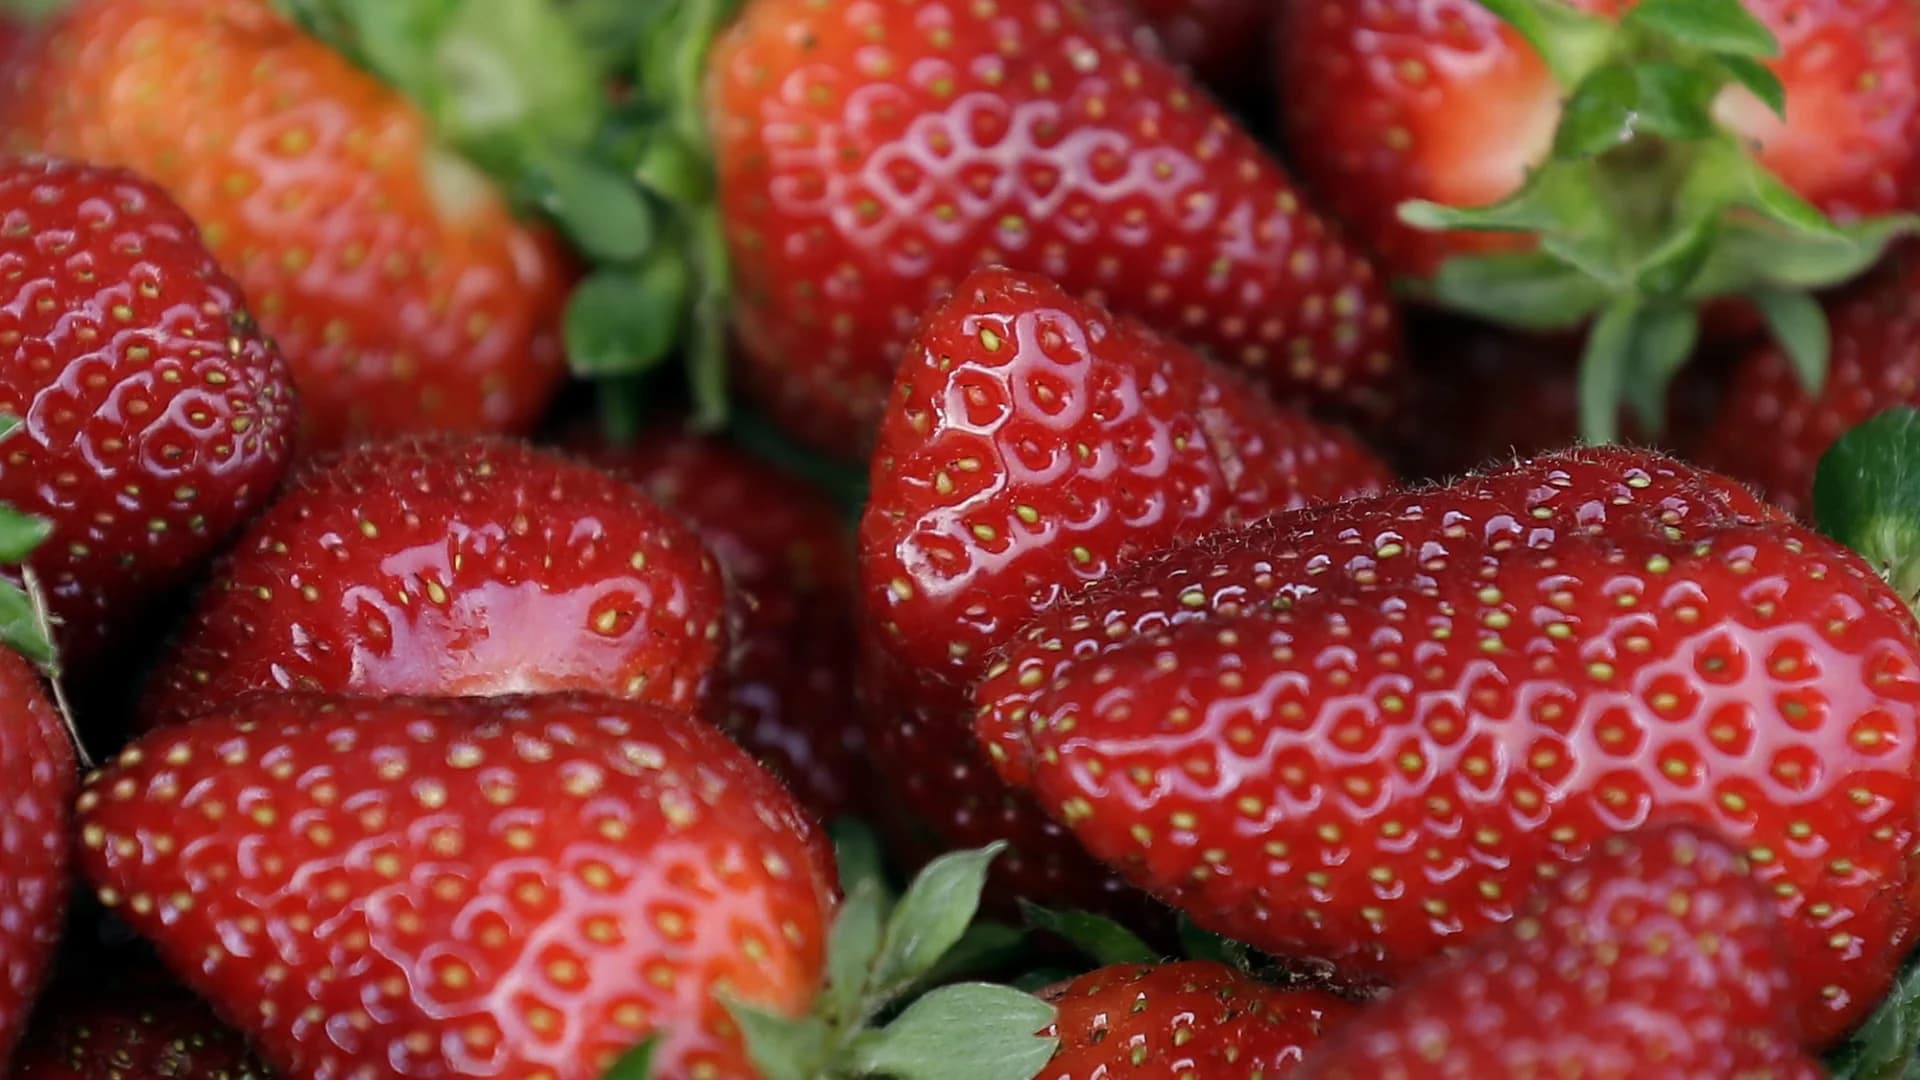 Guide: Where to go strawberry picking on Long Island